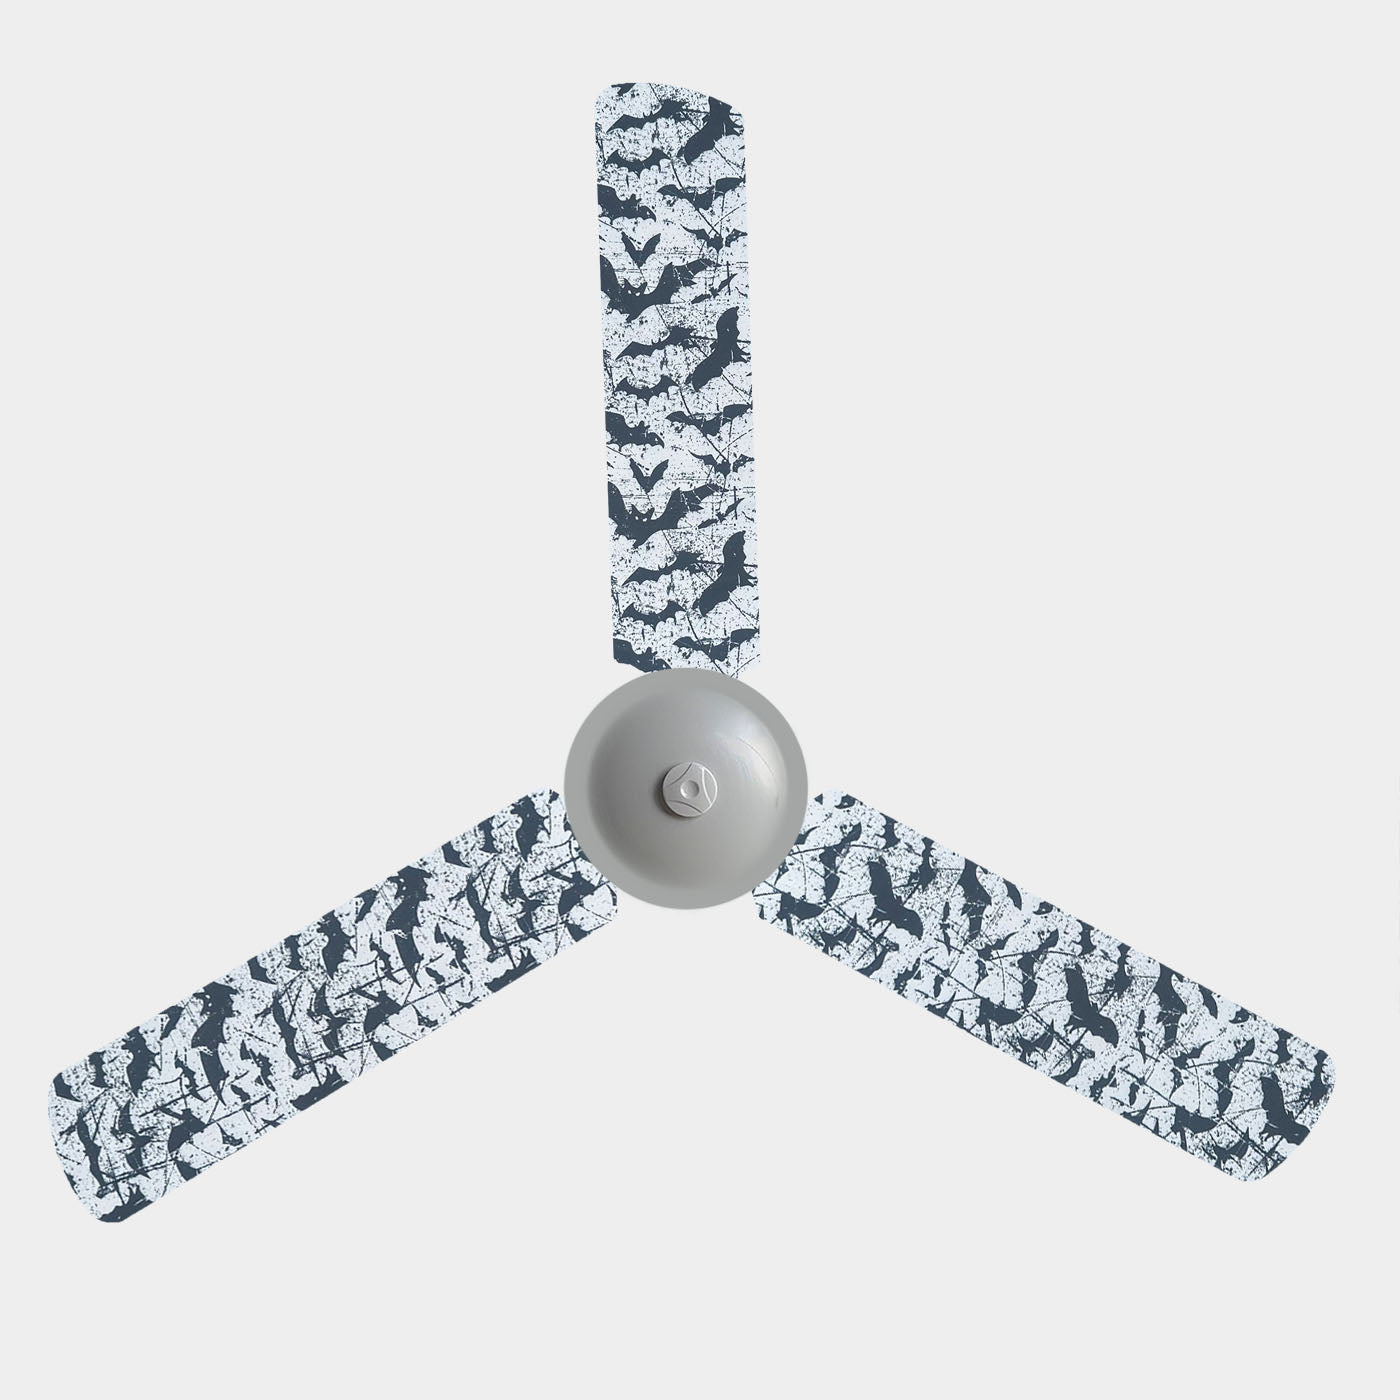 A 3 blade ceiling fan with fabric covers with the design of black bats on a white background